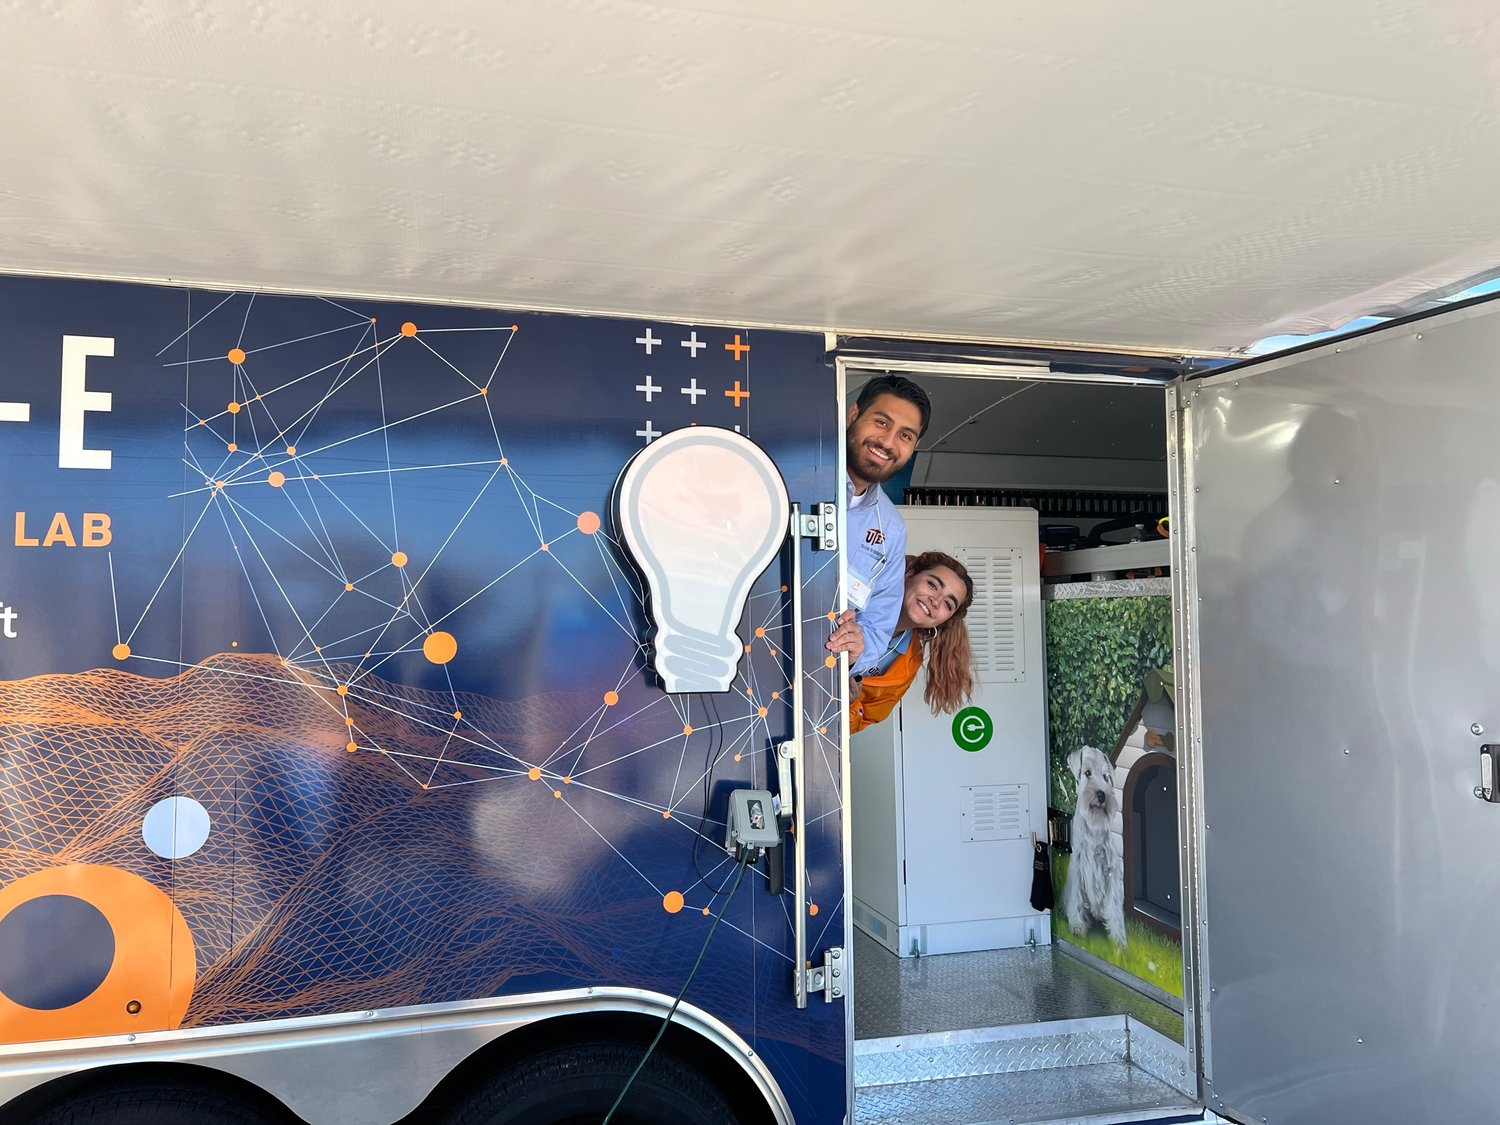 Austin Zambrano and Fatima Orpeneda man the mobile Discover-E engineering and computing lab created by UTEP to take to community events and schools for folks to learn about the nature of power.